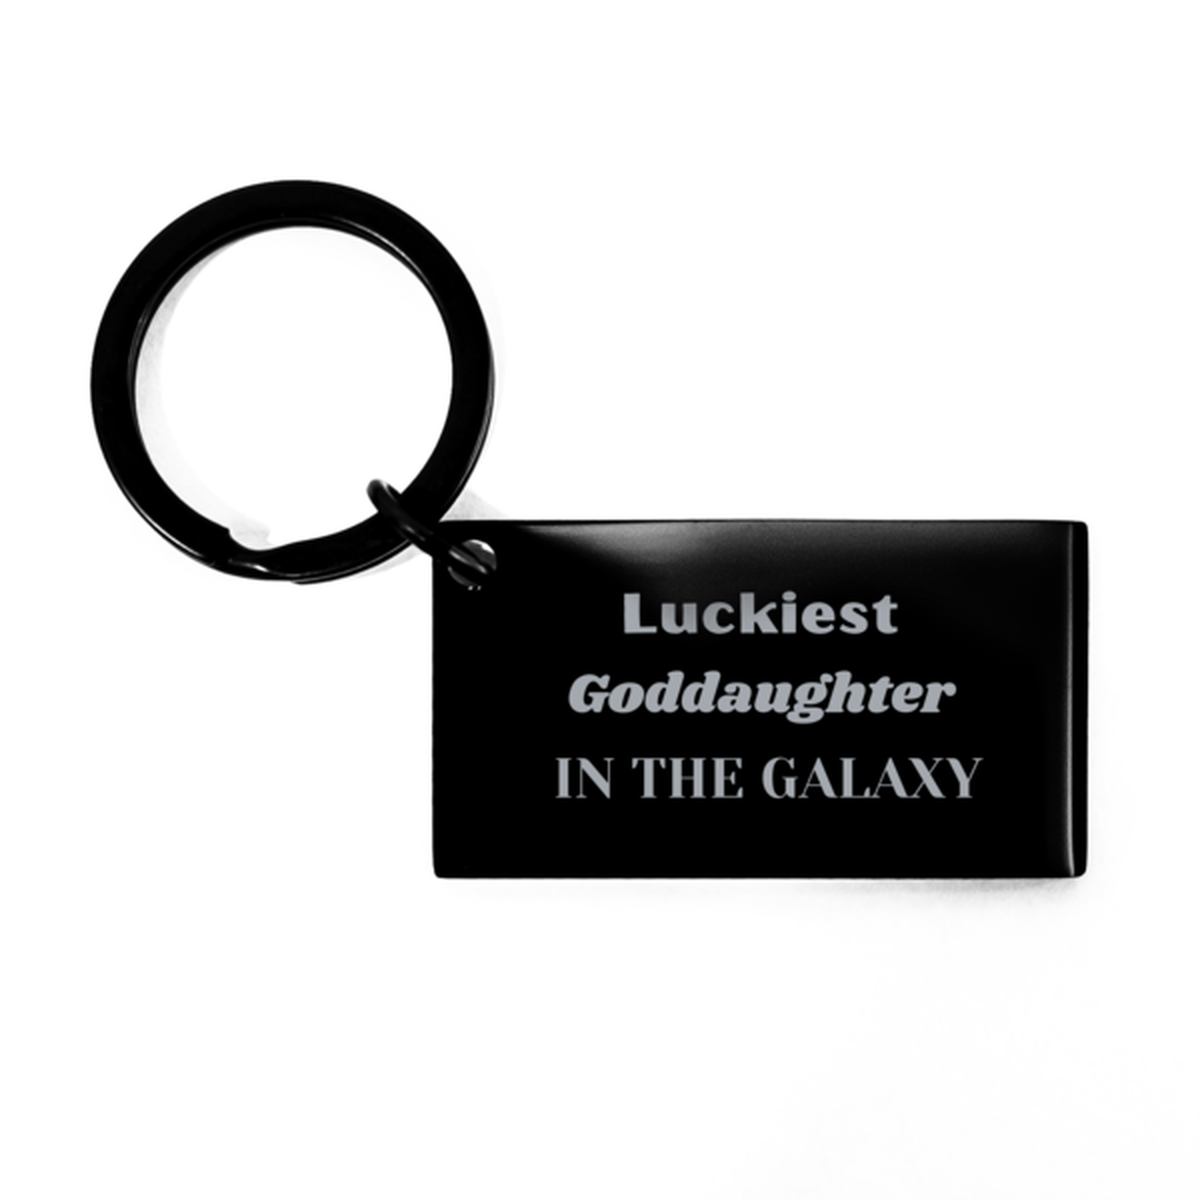 Luckiest Goddaughter in the Galaxy, To My Goddaughter Engraved Gifts, Christmas Goddaughter Keychain Gifts, X-mas Birthday Unique Gifts For Goddaughter Men Women